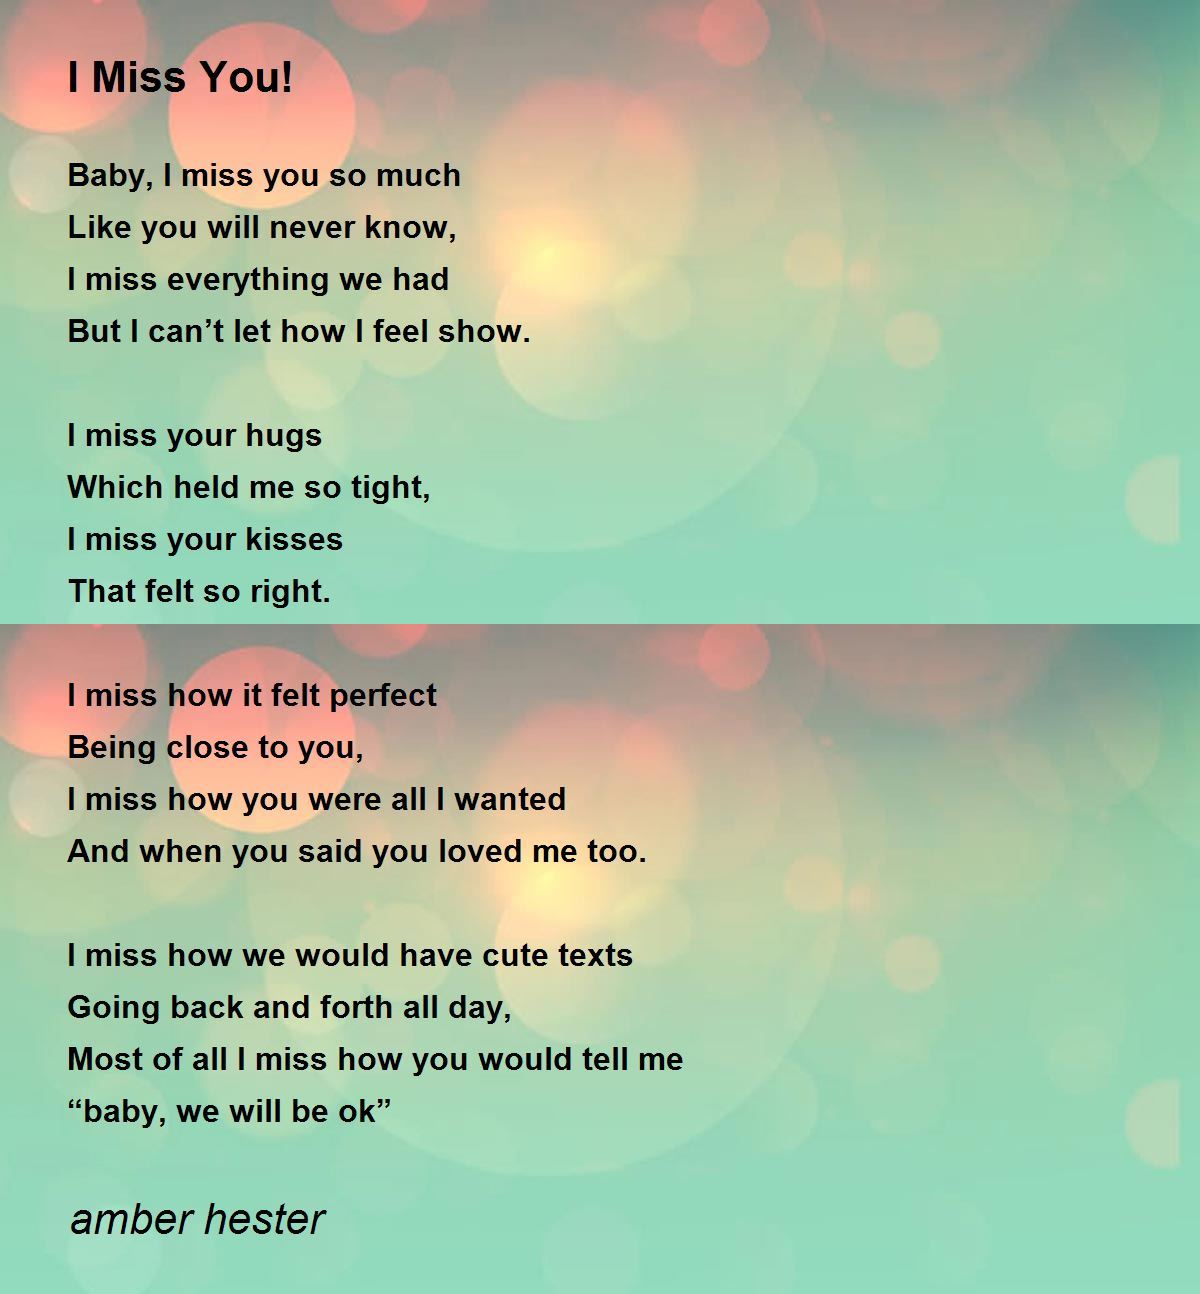 I Miss You! - I Miss You! Poem by amber hester